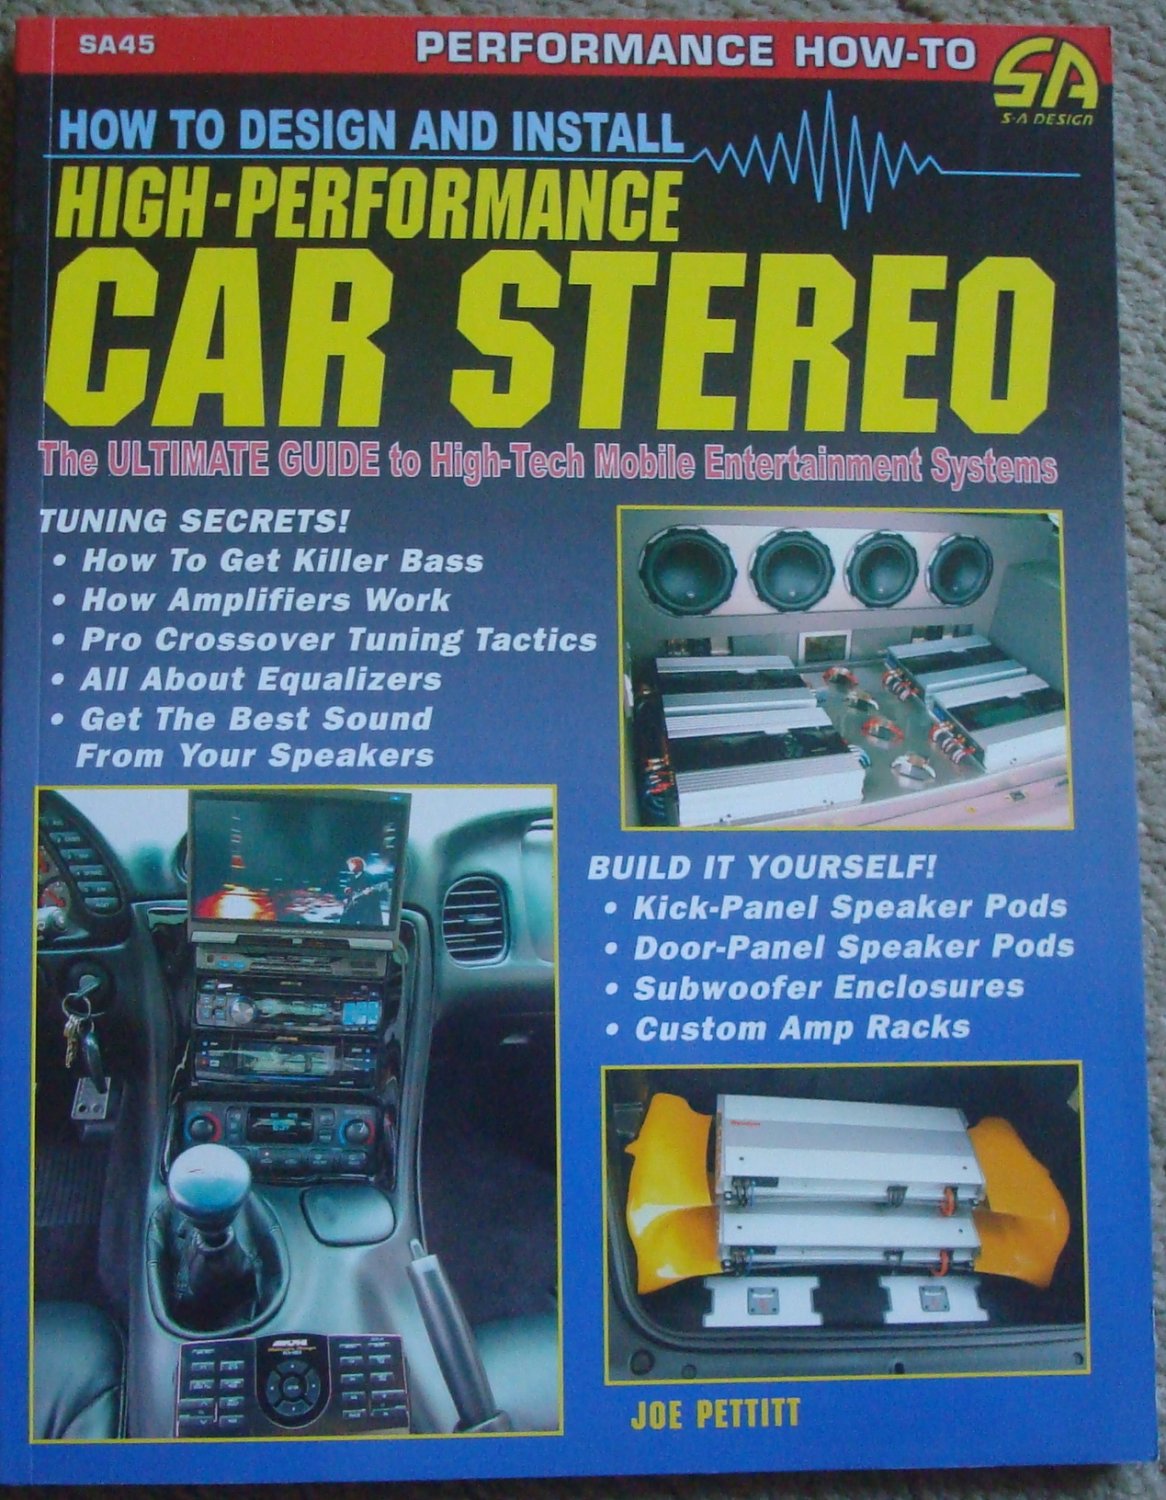 How To Design and Install High-Performance Car Stereo - Revised Edition